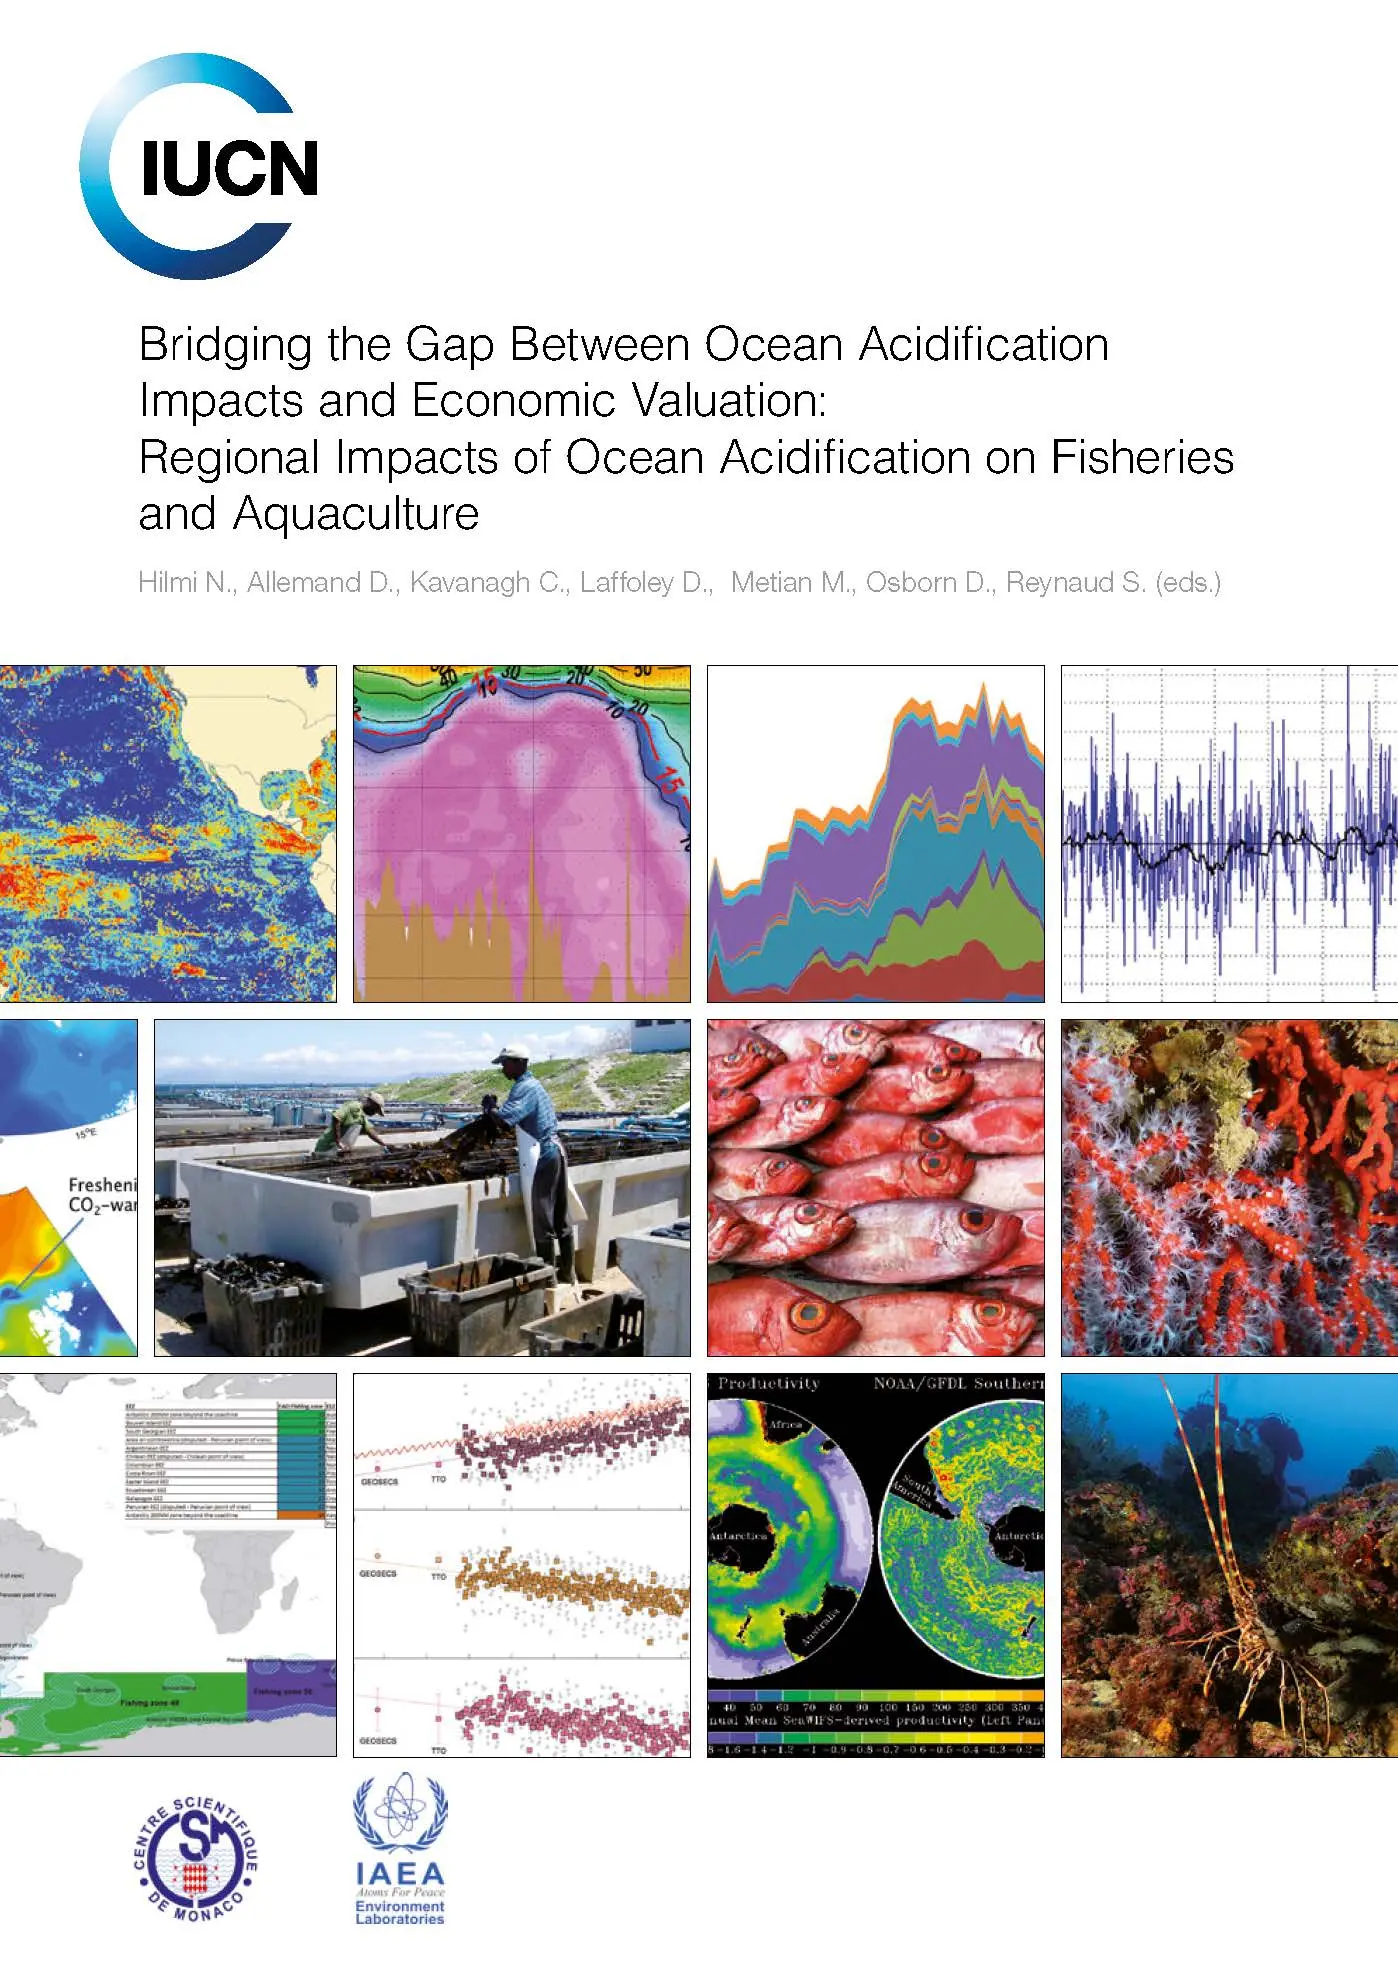 Bridging the Gap Between Ocean Acidification Impacts and Economic Valuation: Regional Impacts of Ocean Acidification on Fisheries and Aquaculture